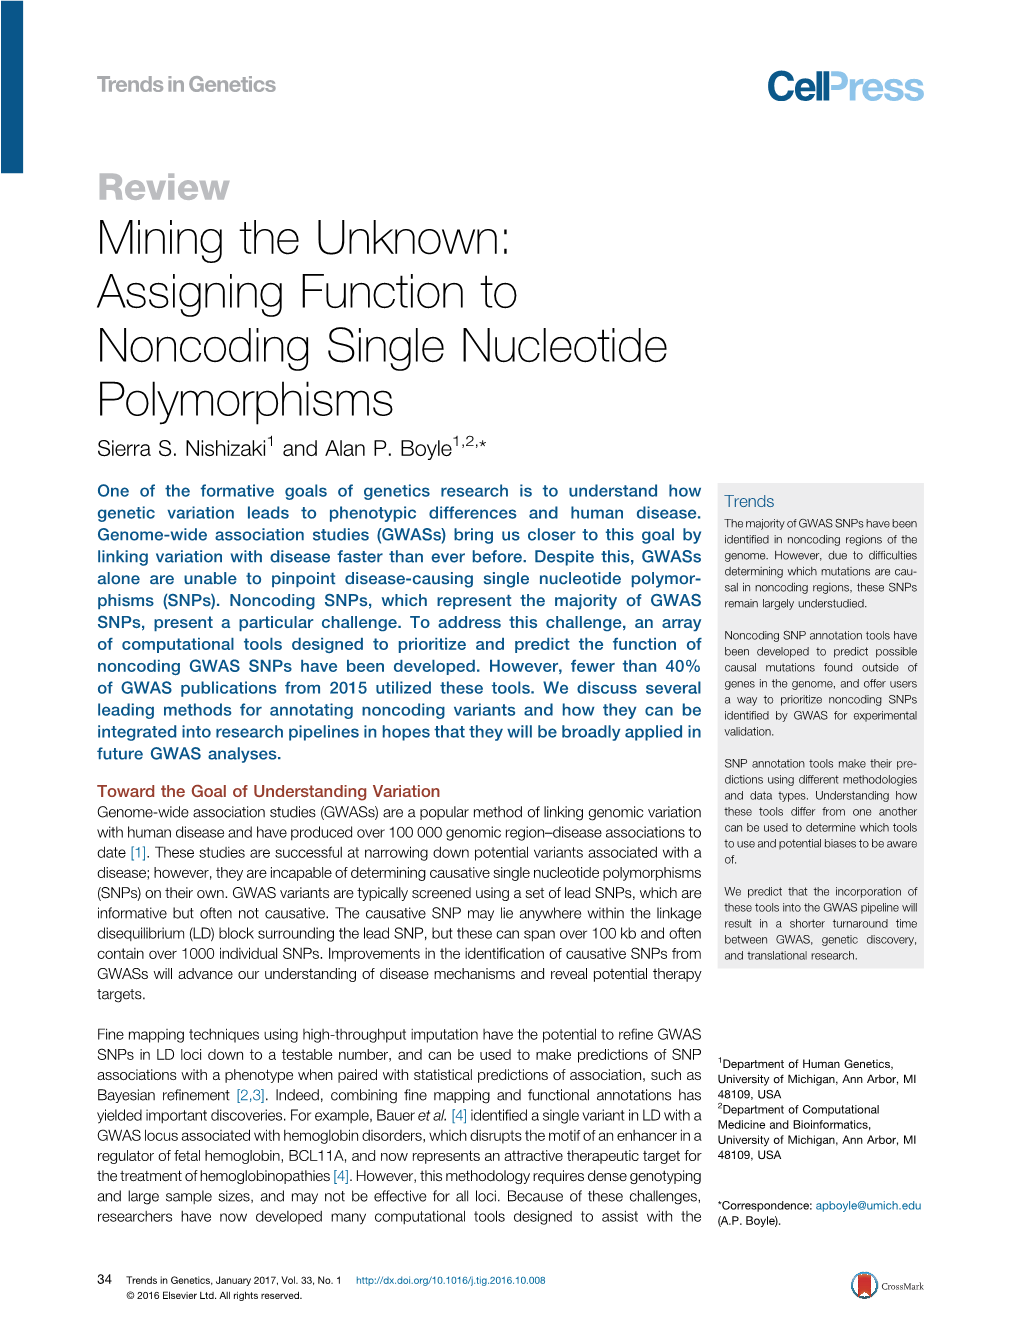 Assigning Function to Noncoding Single Nucleotide